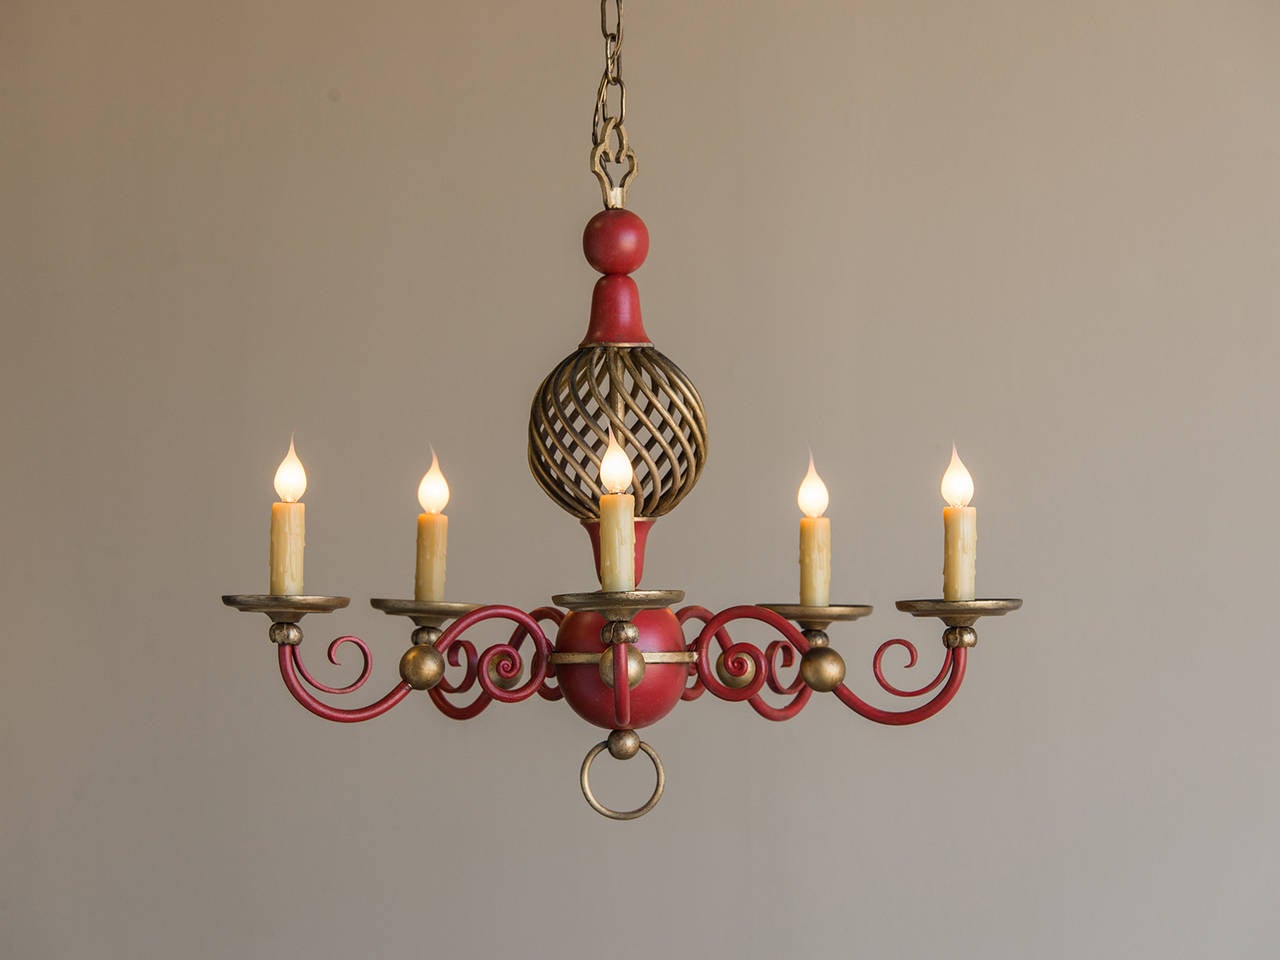 An intriguing vintage painted tole chandelier from France, circa 1940 having an open spiral twist above a closed sphere with five curved arms supporting the lights. The combination of the red and gold on this vintage French fixture makes a potent